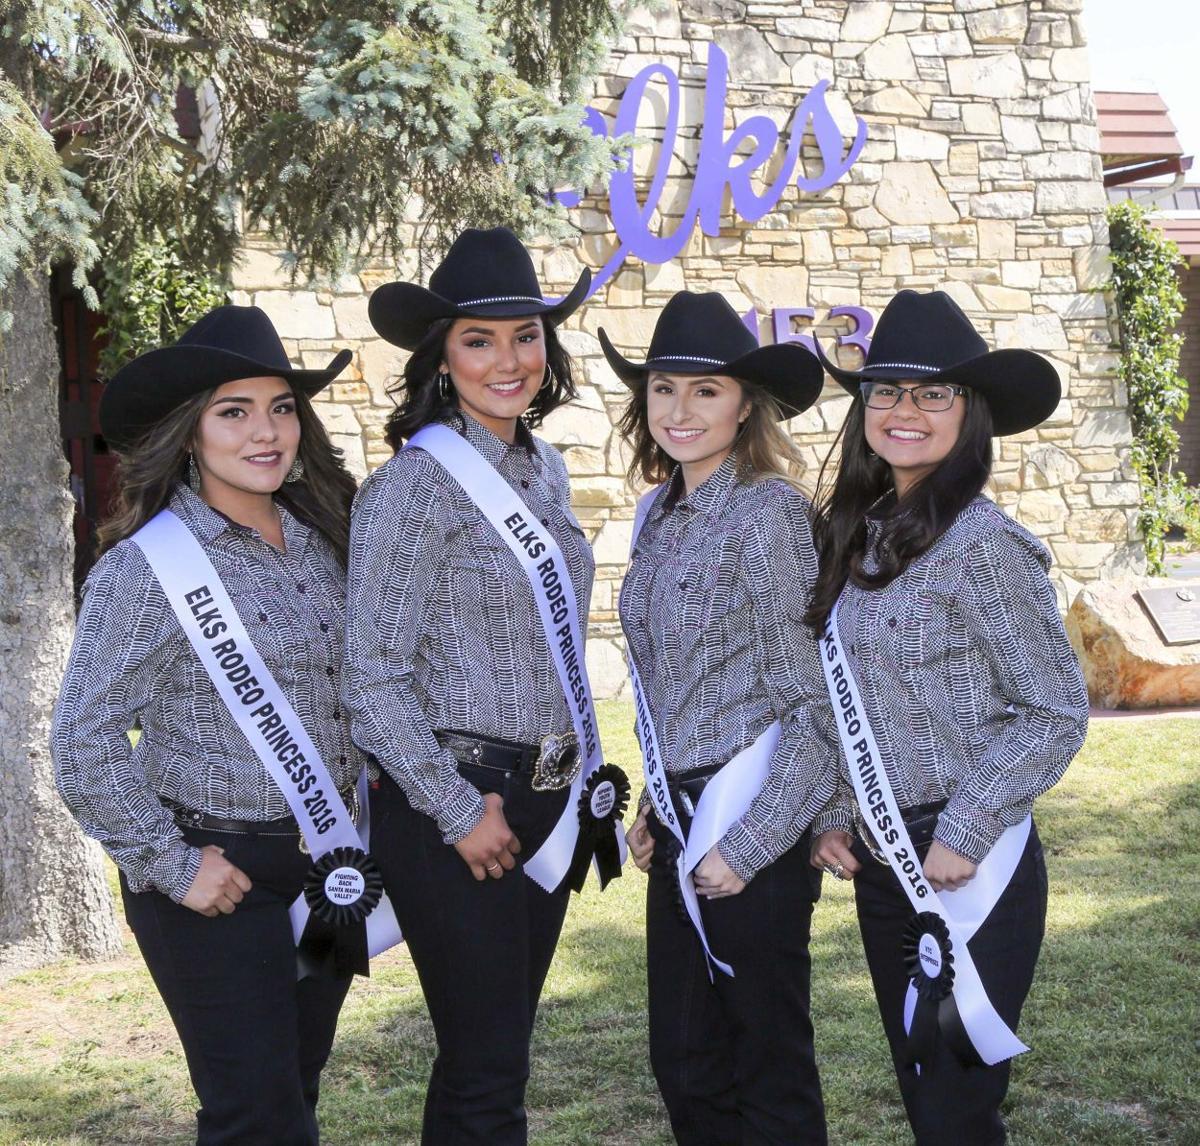 Elks Rodeo Queen candidates revealed at kickoff dinner Local